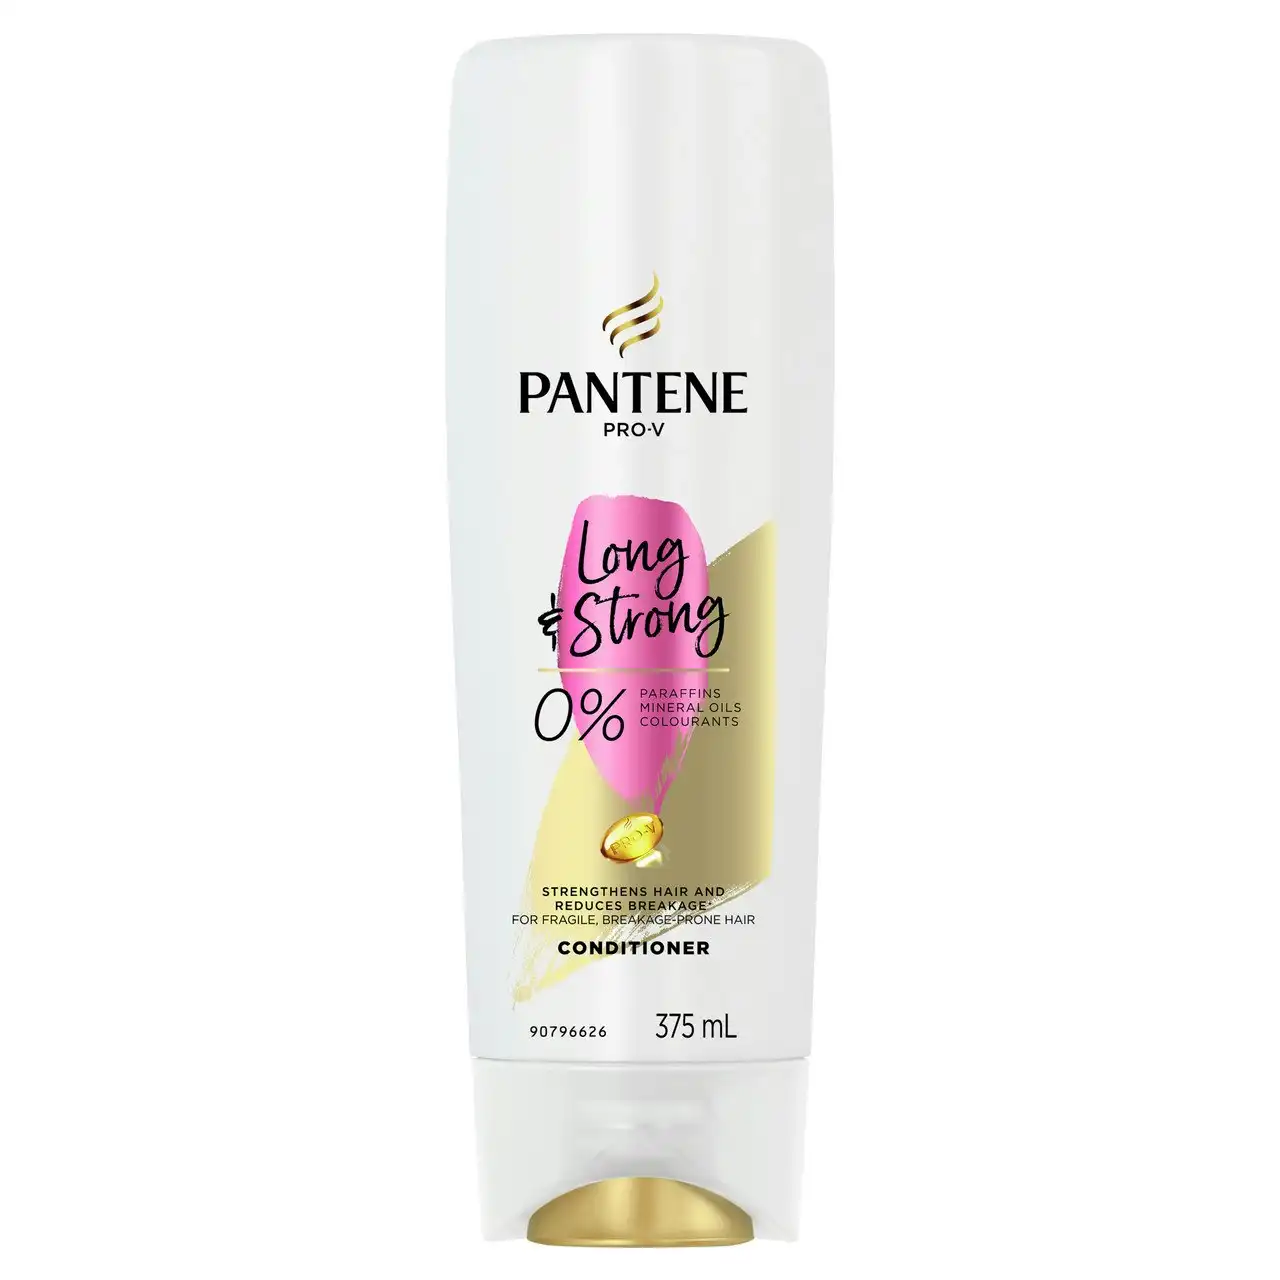 Pantene Pro-V Long & Strong Conditioner: Strengthening Conditioner for Dry, Damaged Hair 375 ml